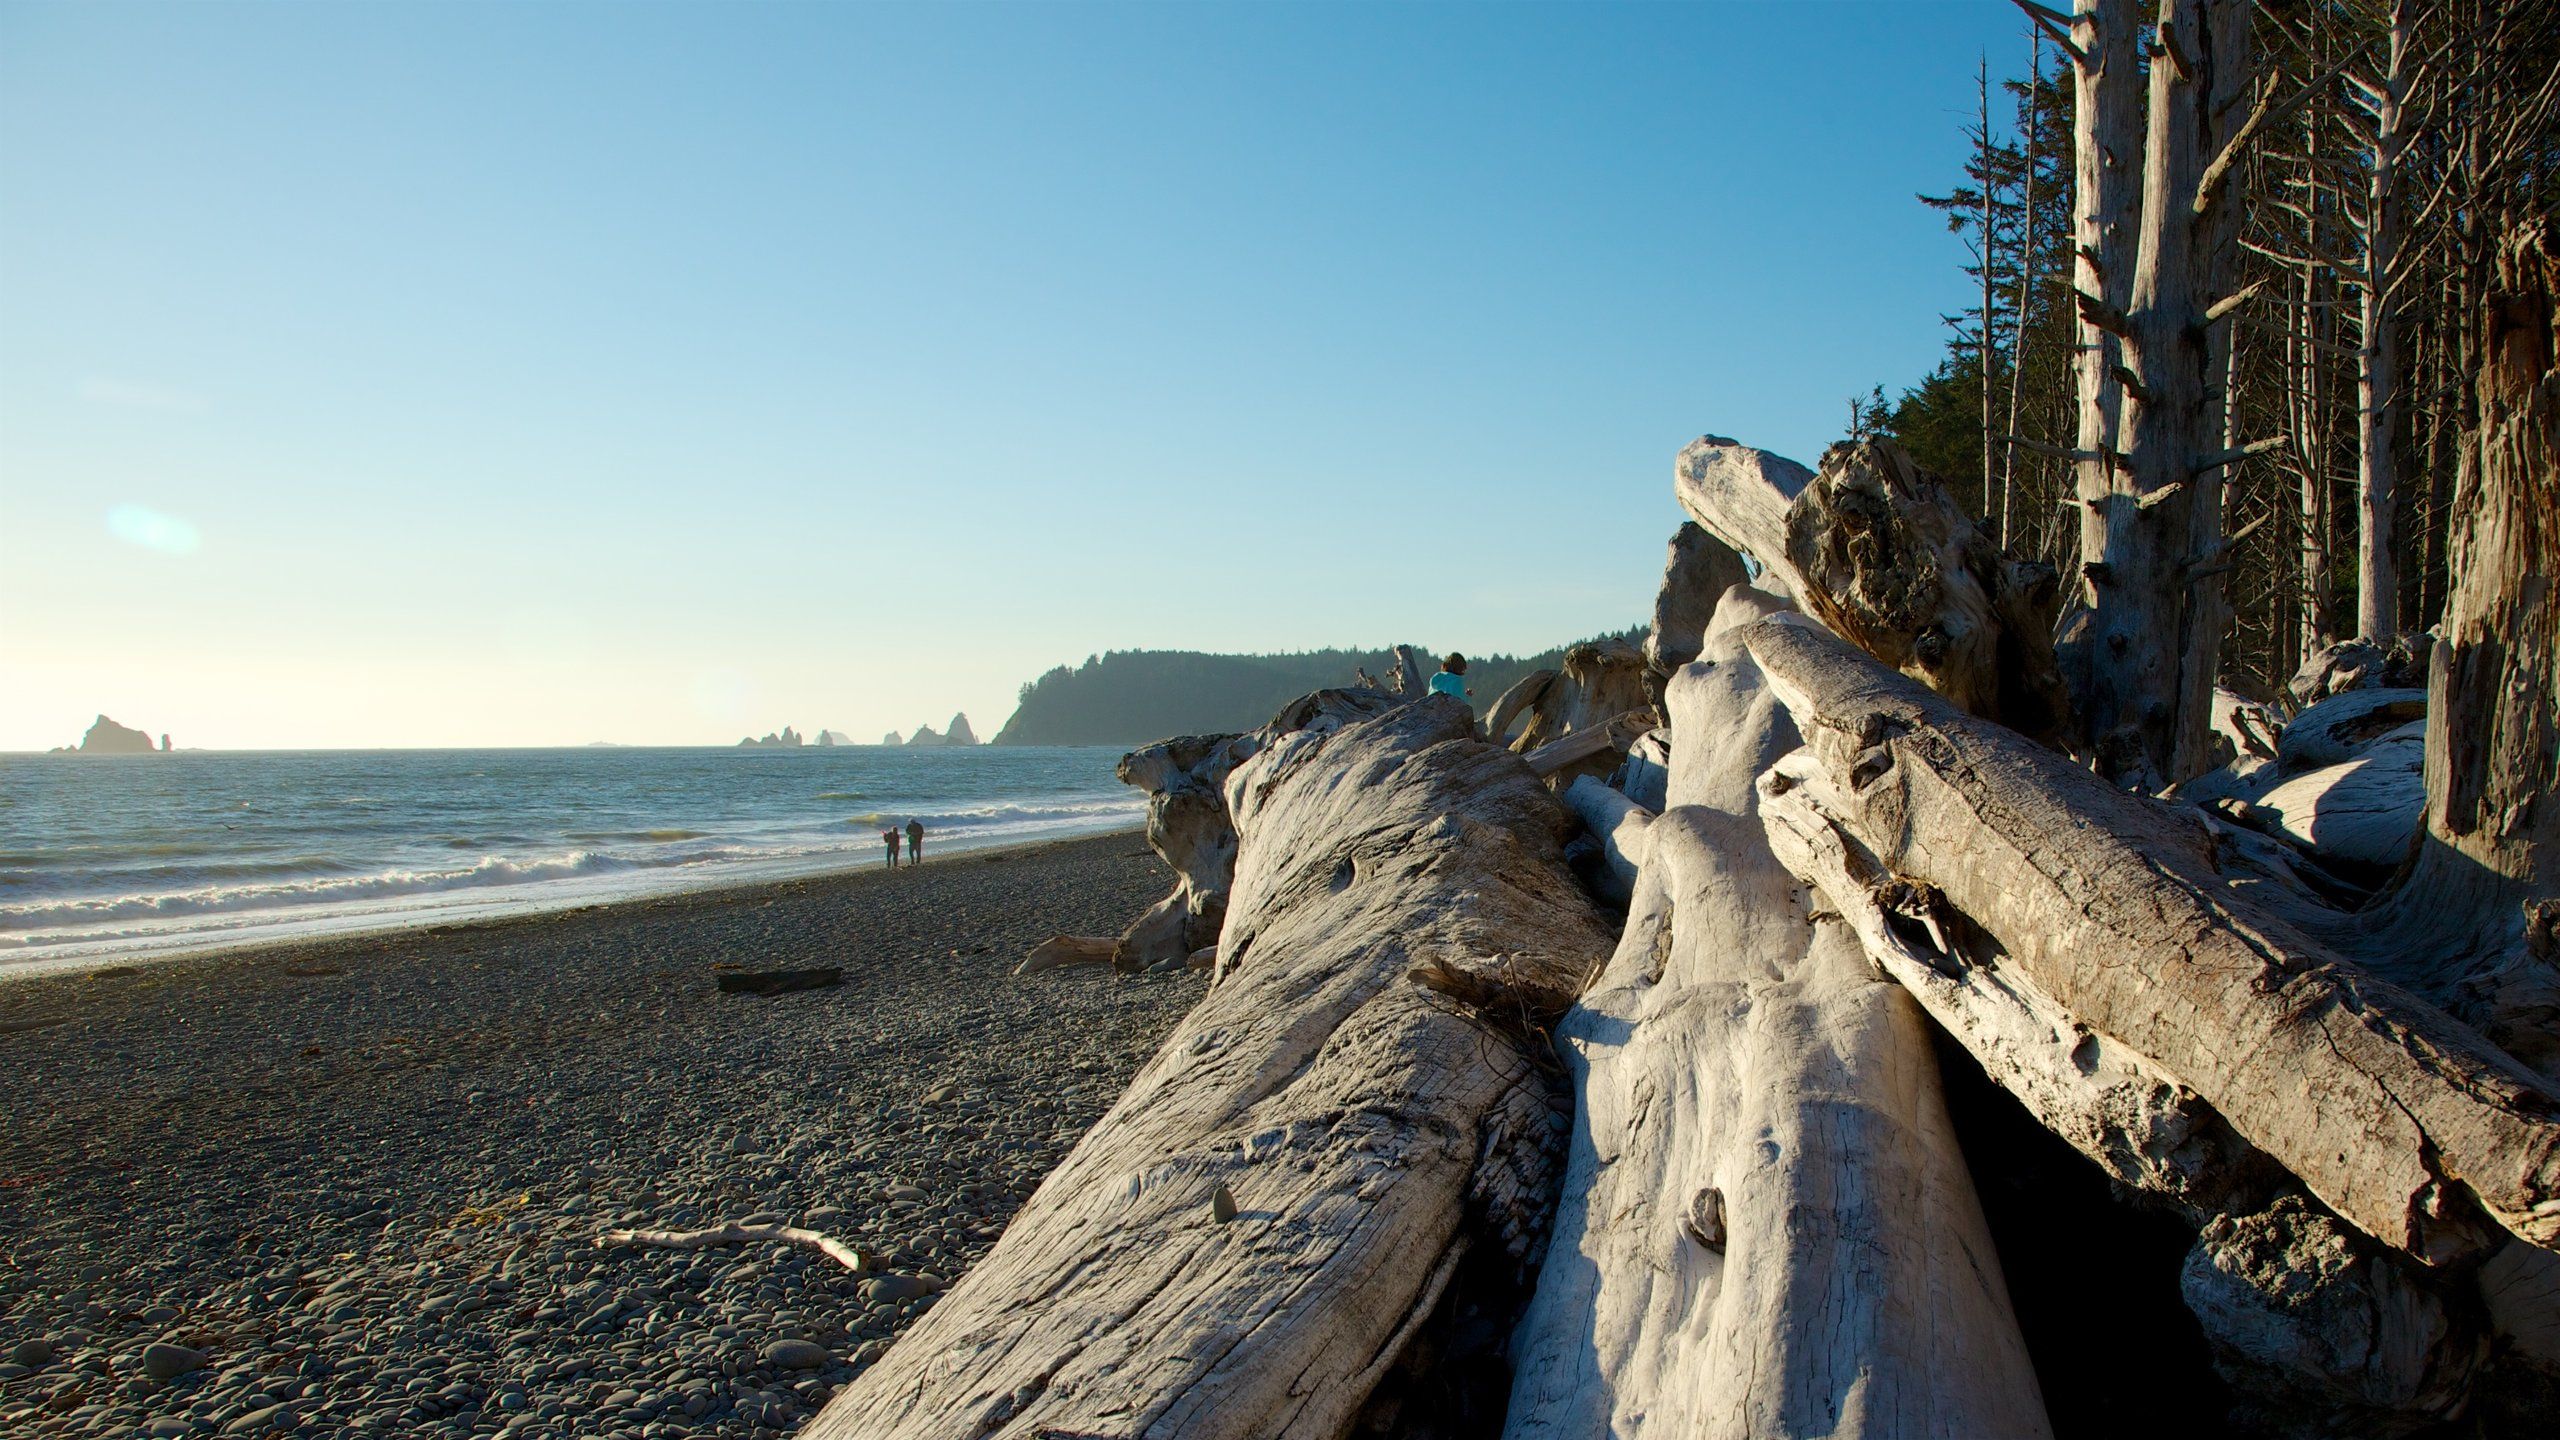 2560x1440 Top Hotels In La Push For 2020 (from CA $91 Night) on WallpaperBat